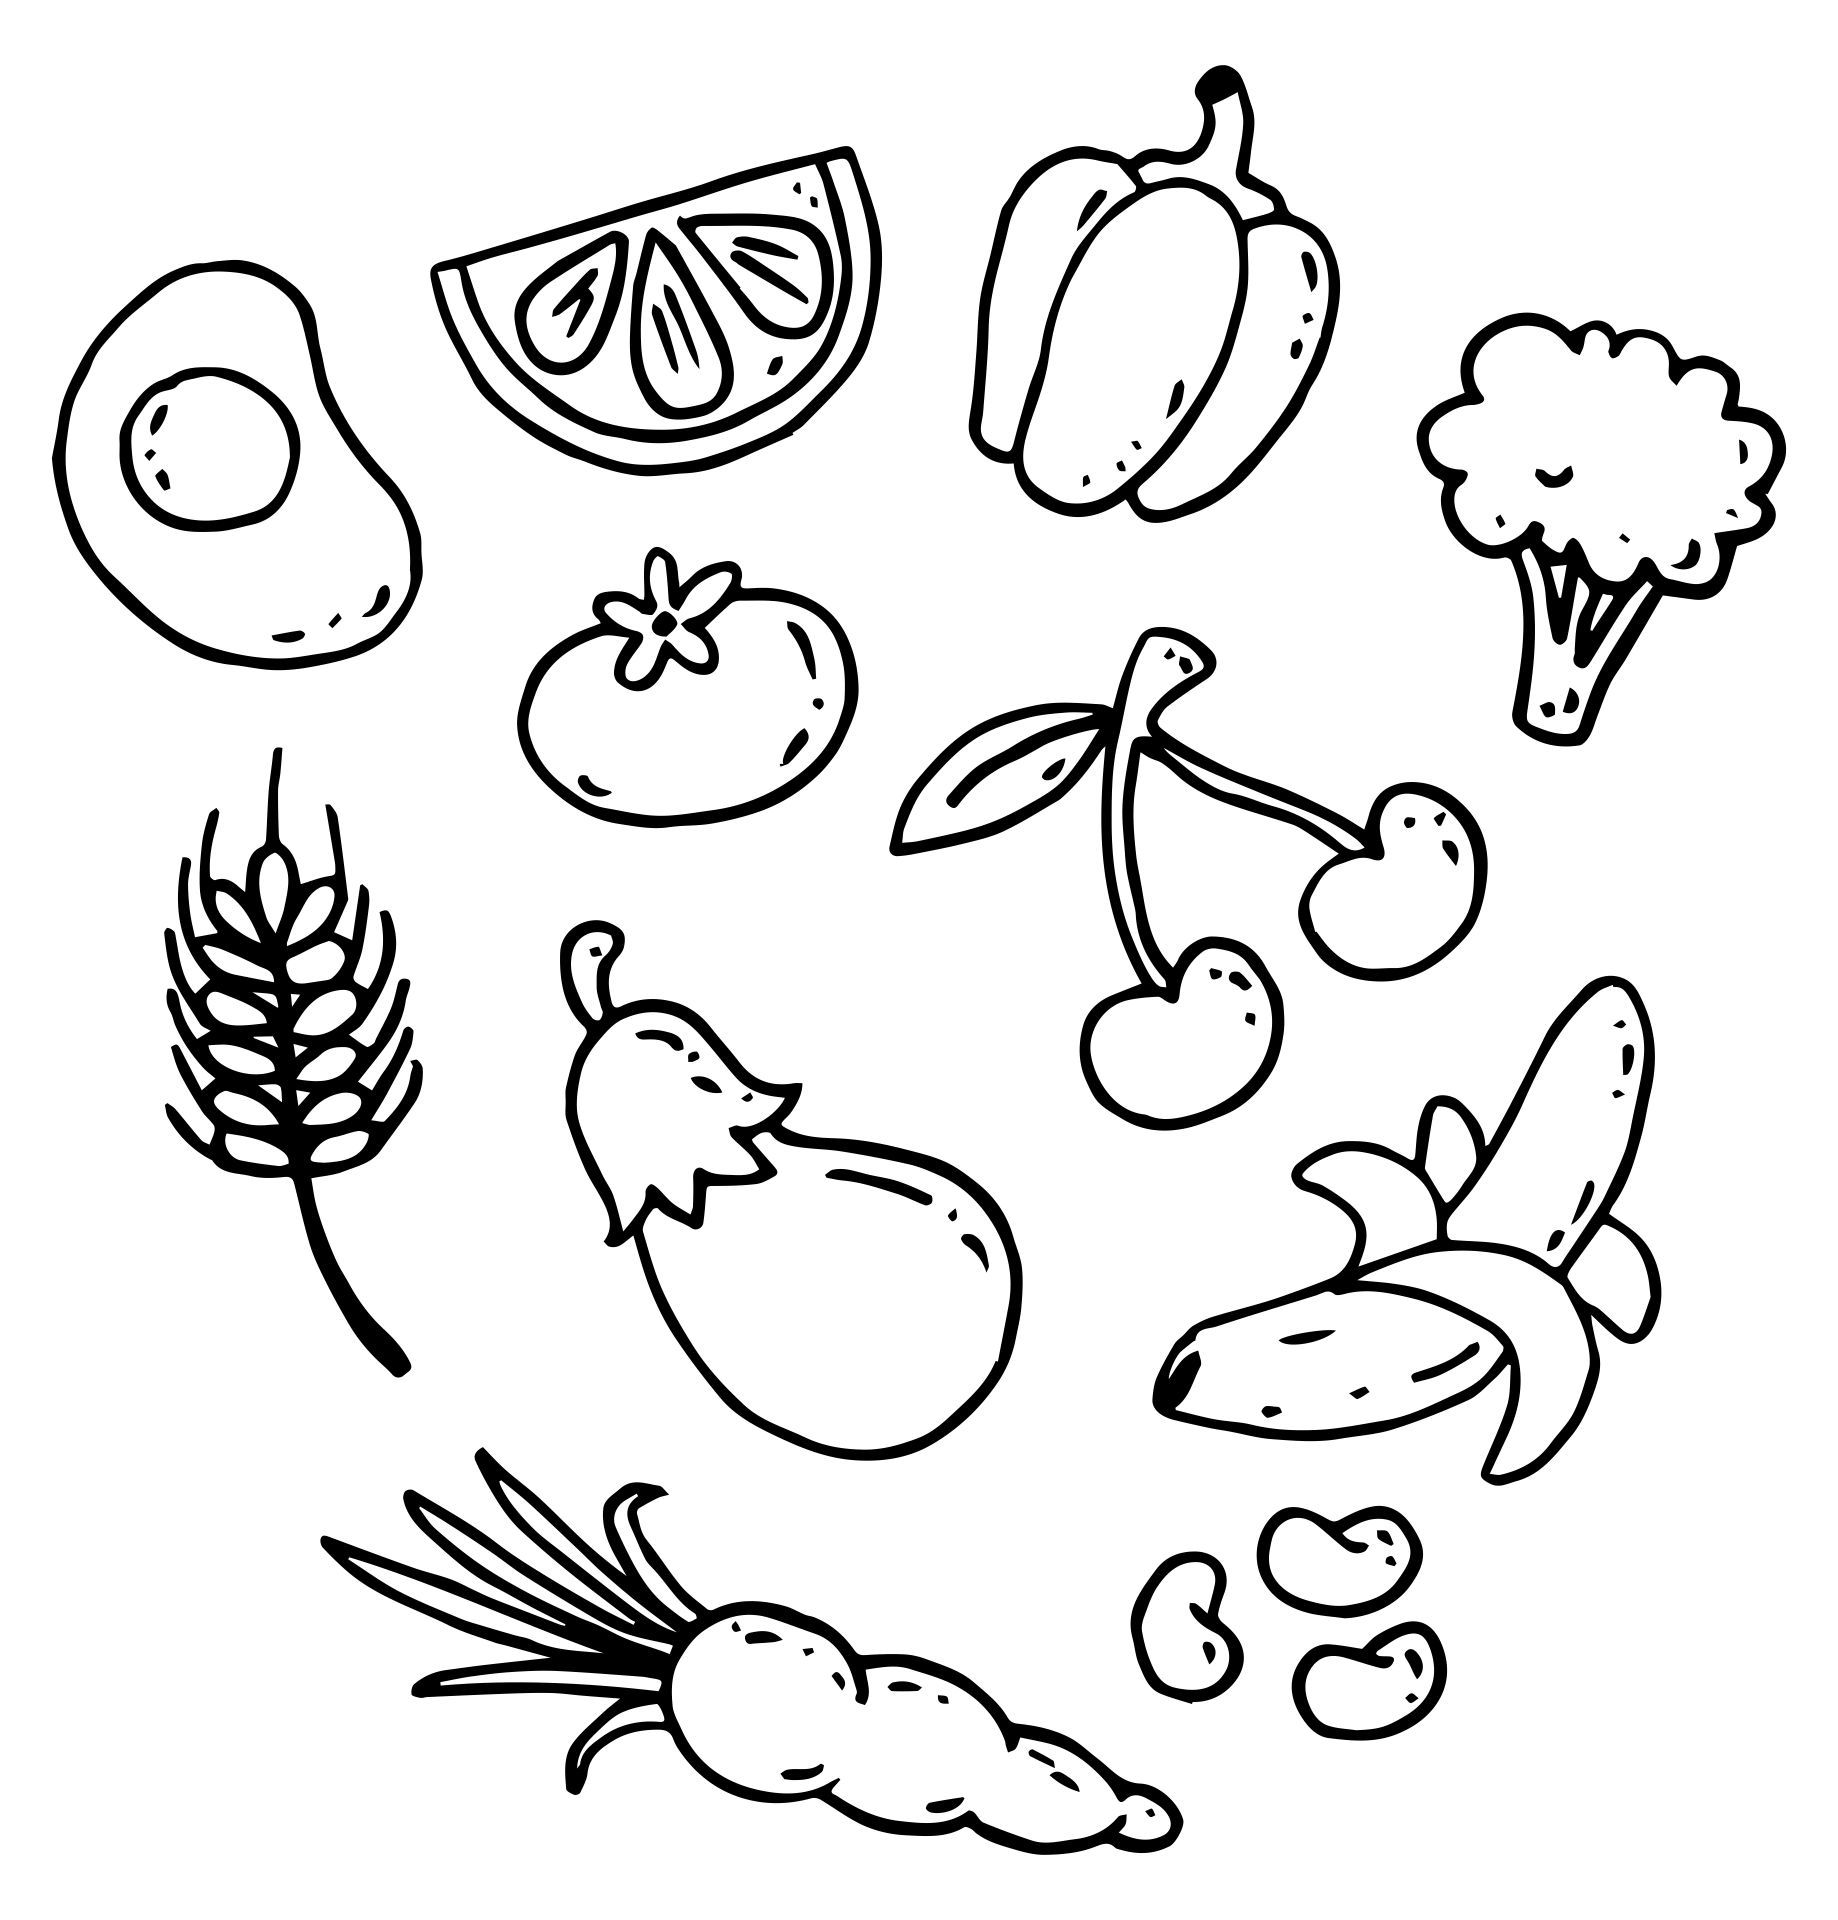 Printable fruits and vegetables coloring pages pdf fruits and vegetables fruit picture garden coloring pages